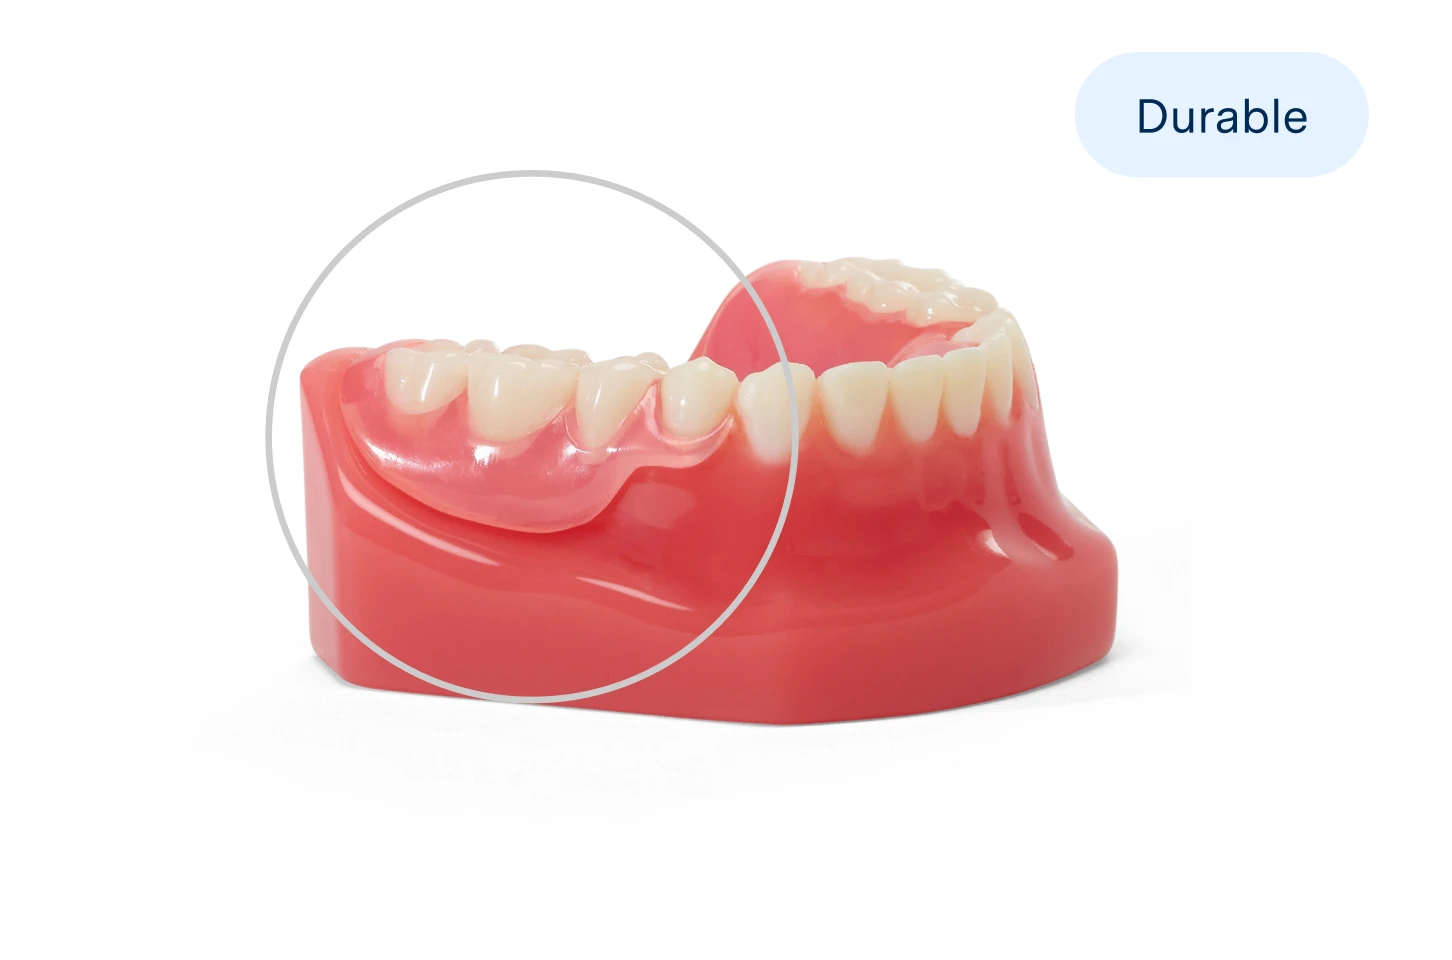 Partial dentures showcased on lower denture model with words 'Durable' on it, emphasizing denture options for tooth replacement.